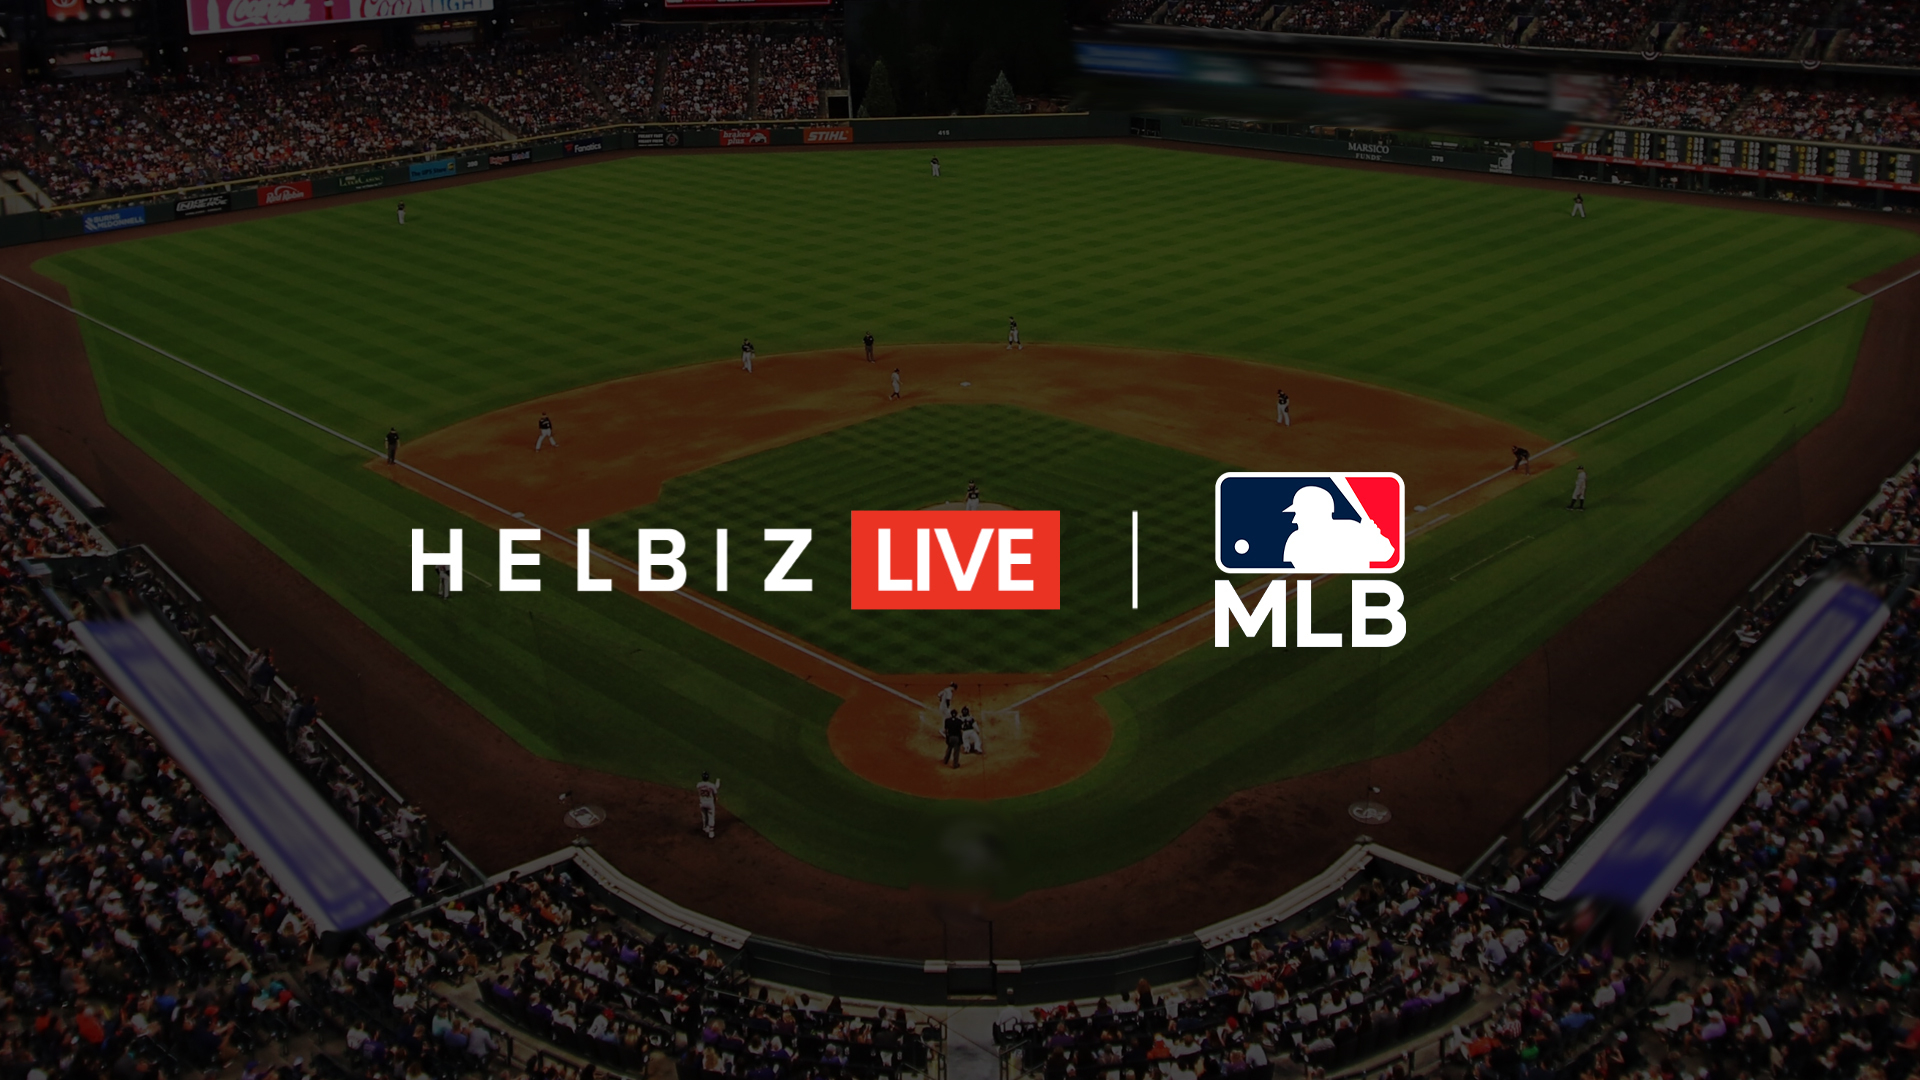 Helbiz Media Signs Agreement with MLB to Stream Next Three Seasons on Helbiz Live Business Wire